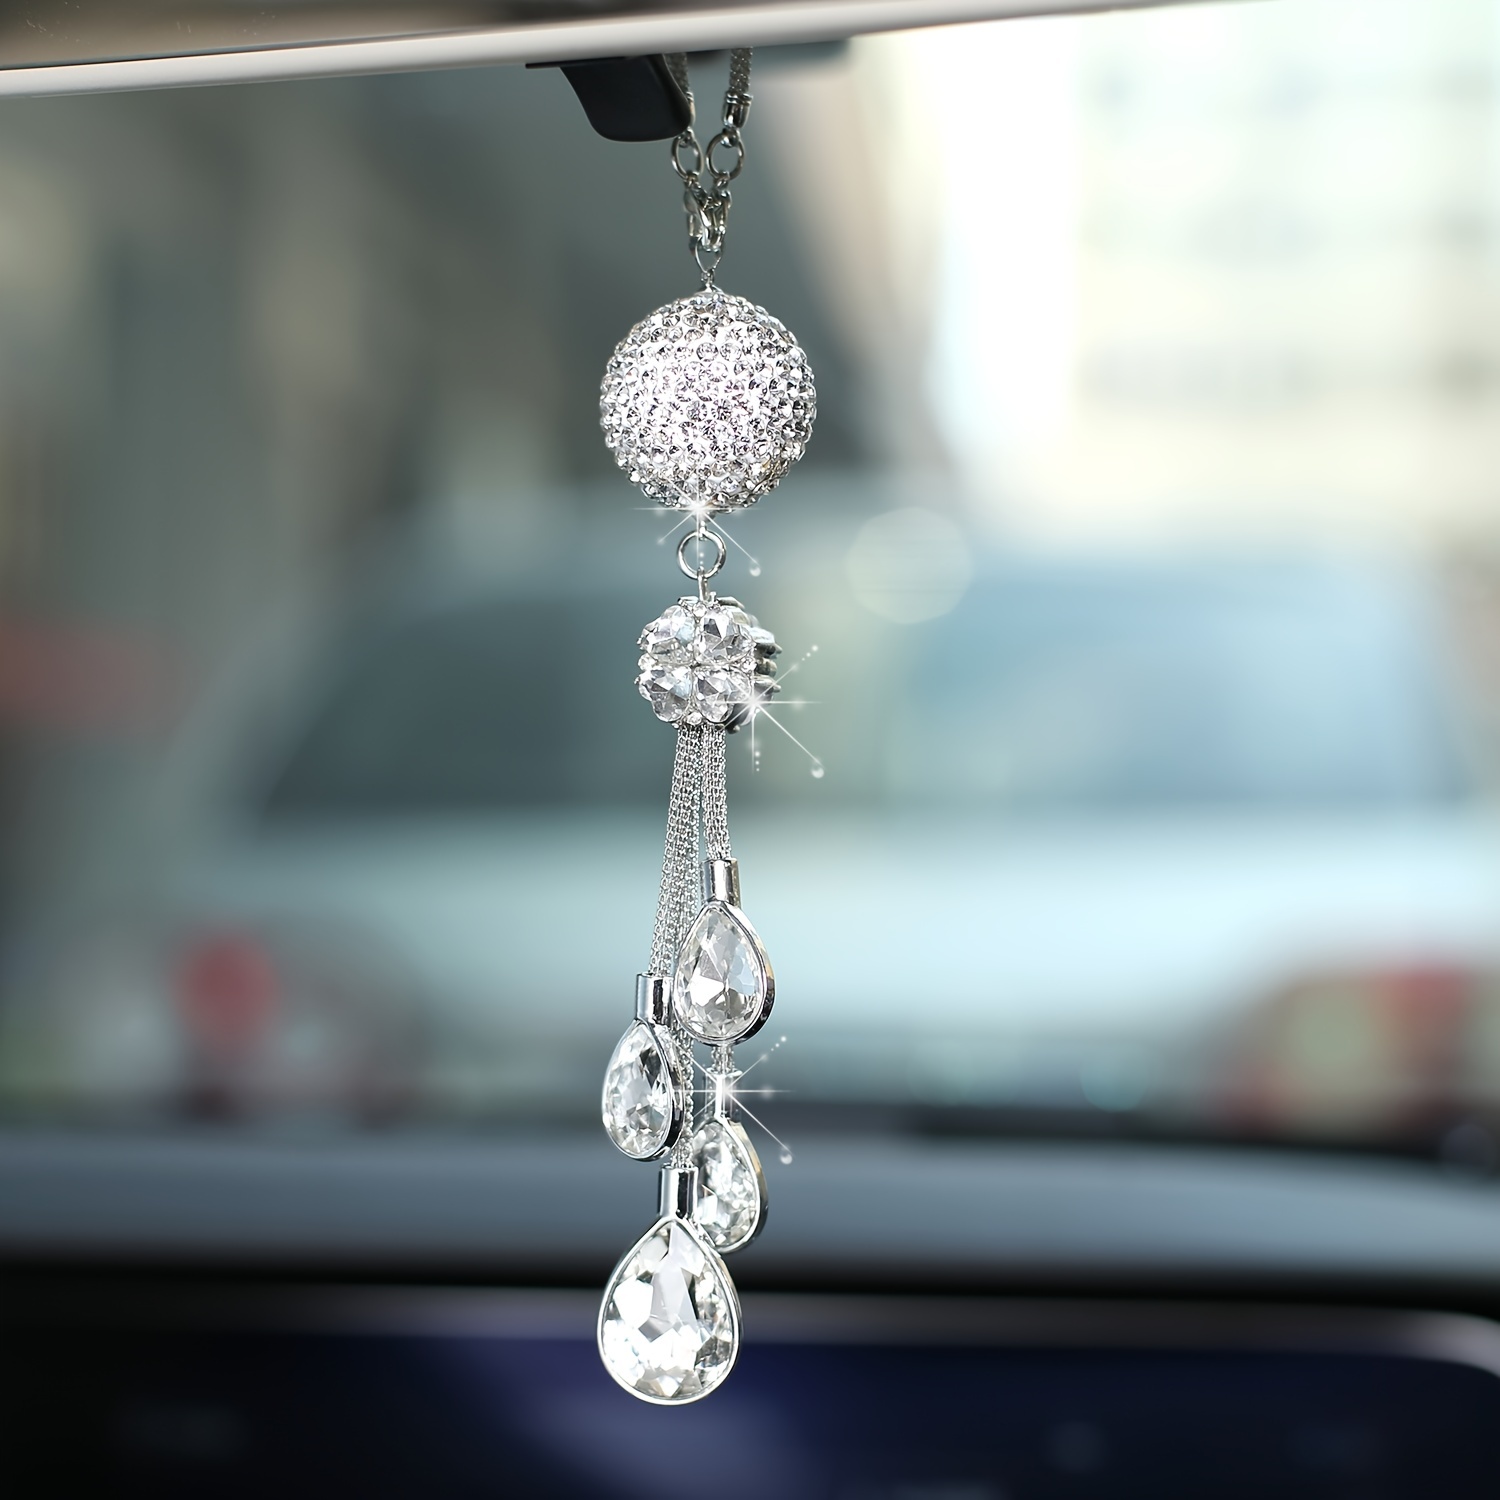 Rear View Mirror Accessories Crochet Swinging Couple Octopus Car Decor  Hanging Ornaments Cute Car Accessories for Women or Teens Car Pendant Car